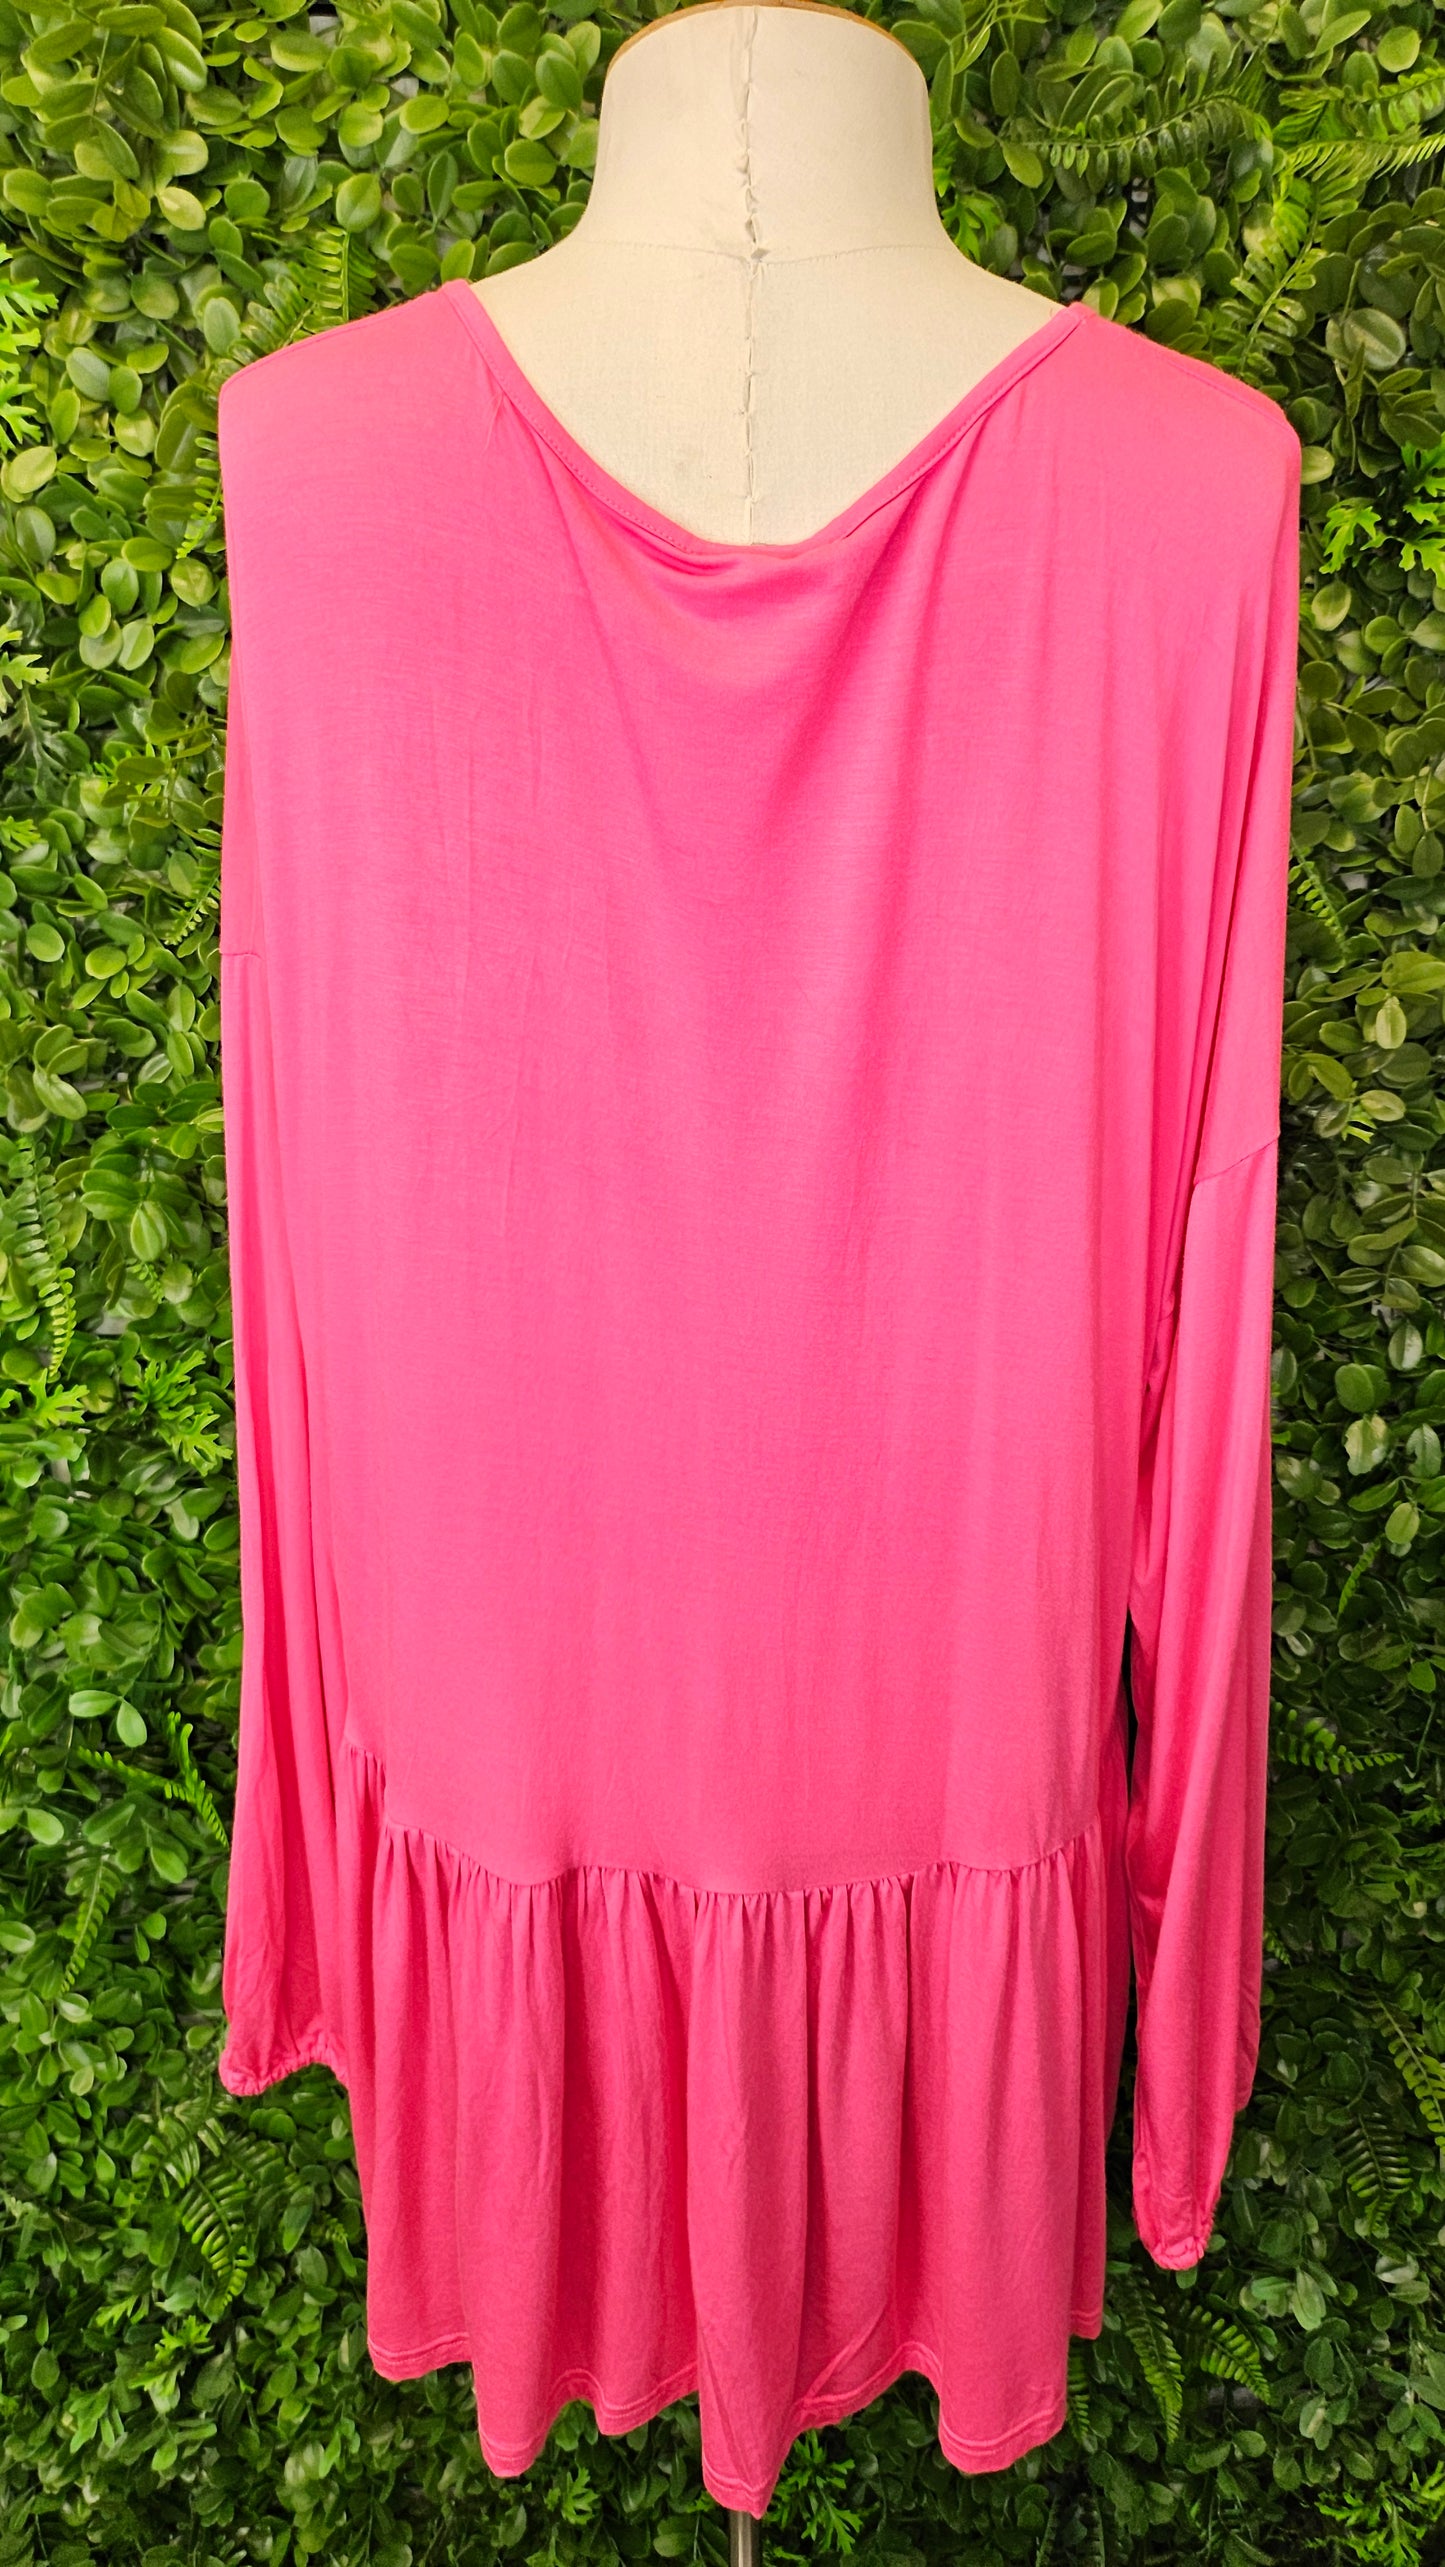 Home Lee Pink Frill Drape Top (14)